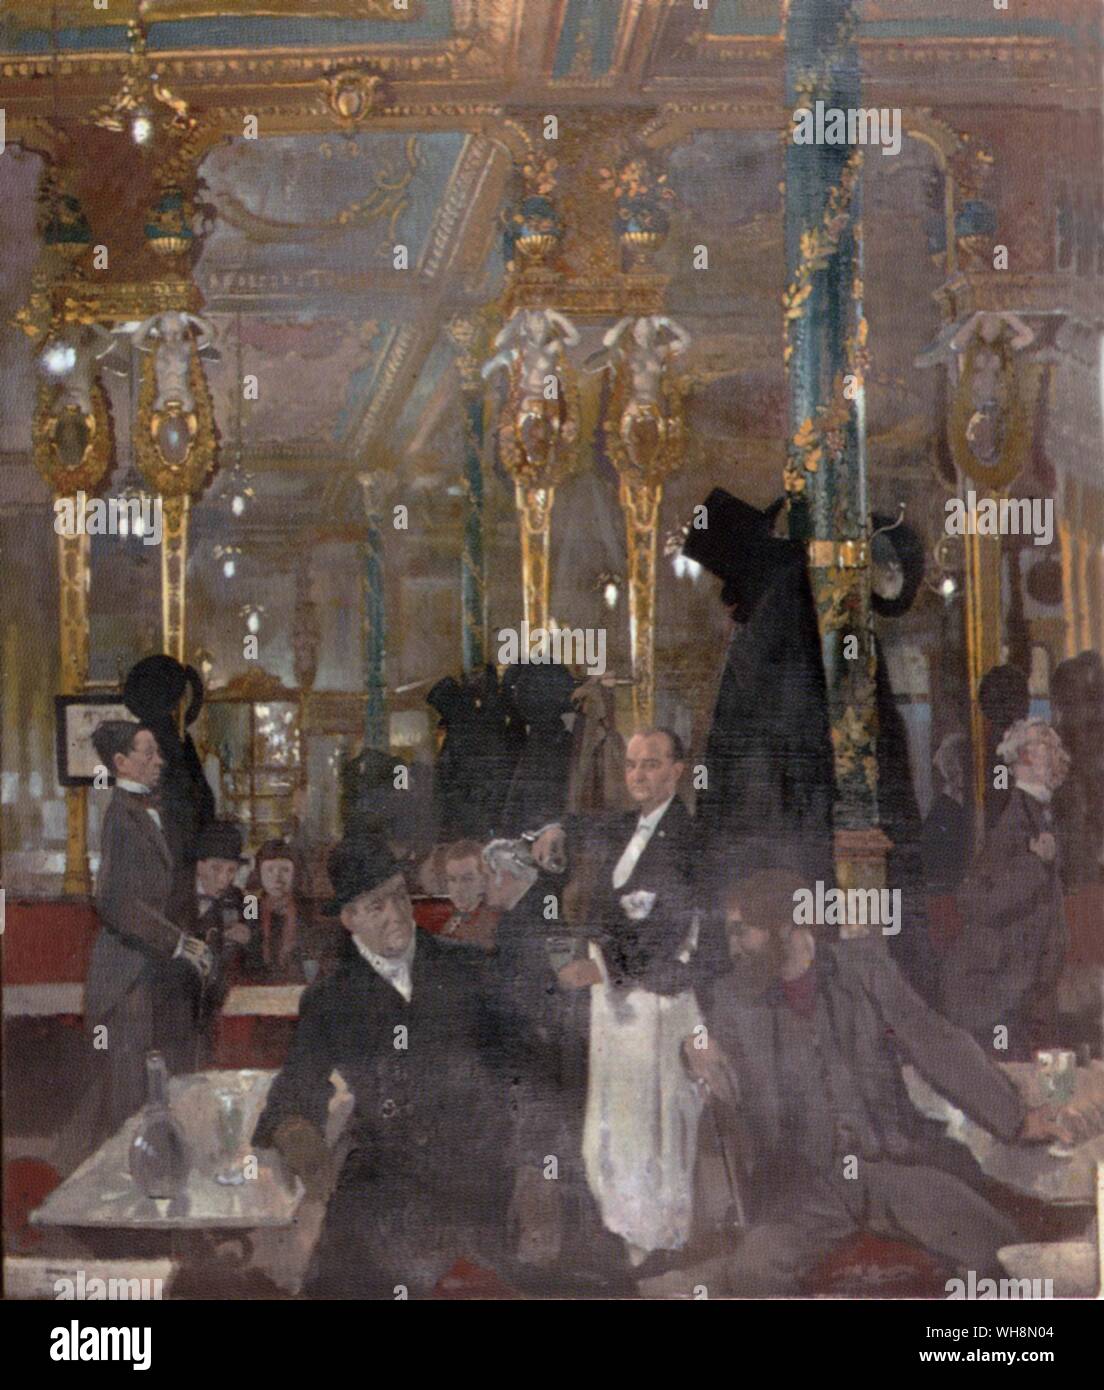 A gathering of writers and artists in the Domino Room (left to right) Sir William Nicholson, unknown man, Nina Hamnett, James Pryde, self portrait, unknown man, waiter, Augustus John and George Moore Stock Photo